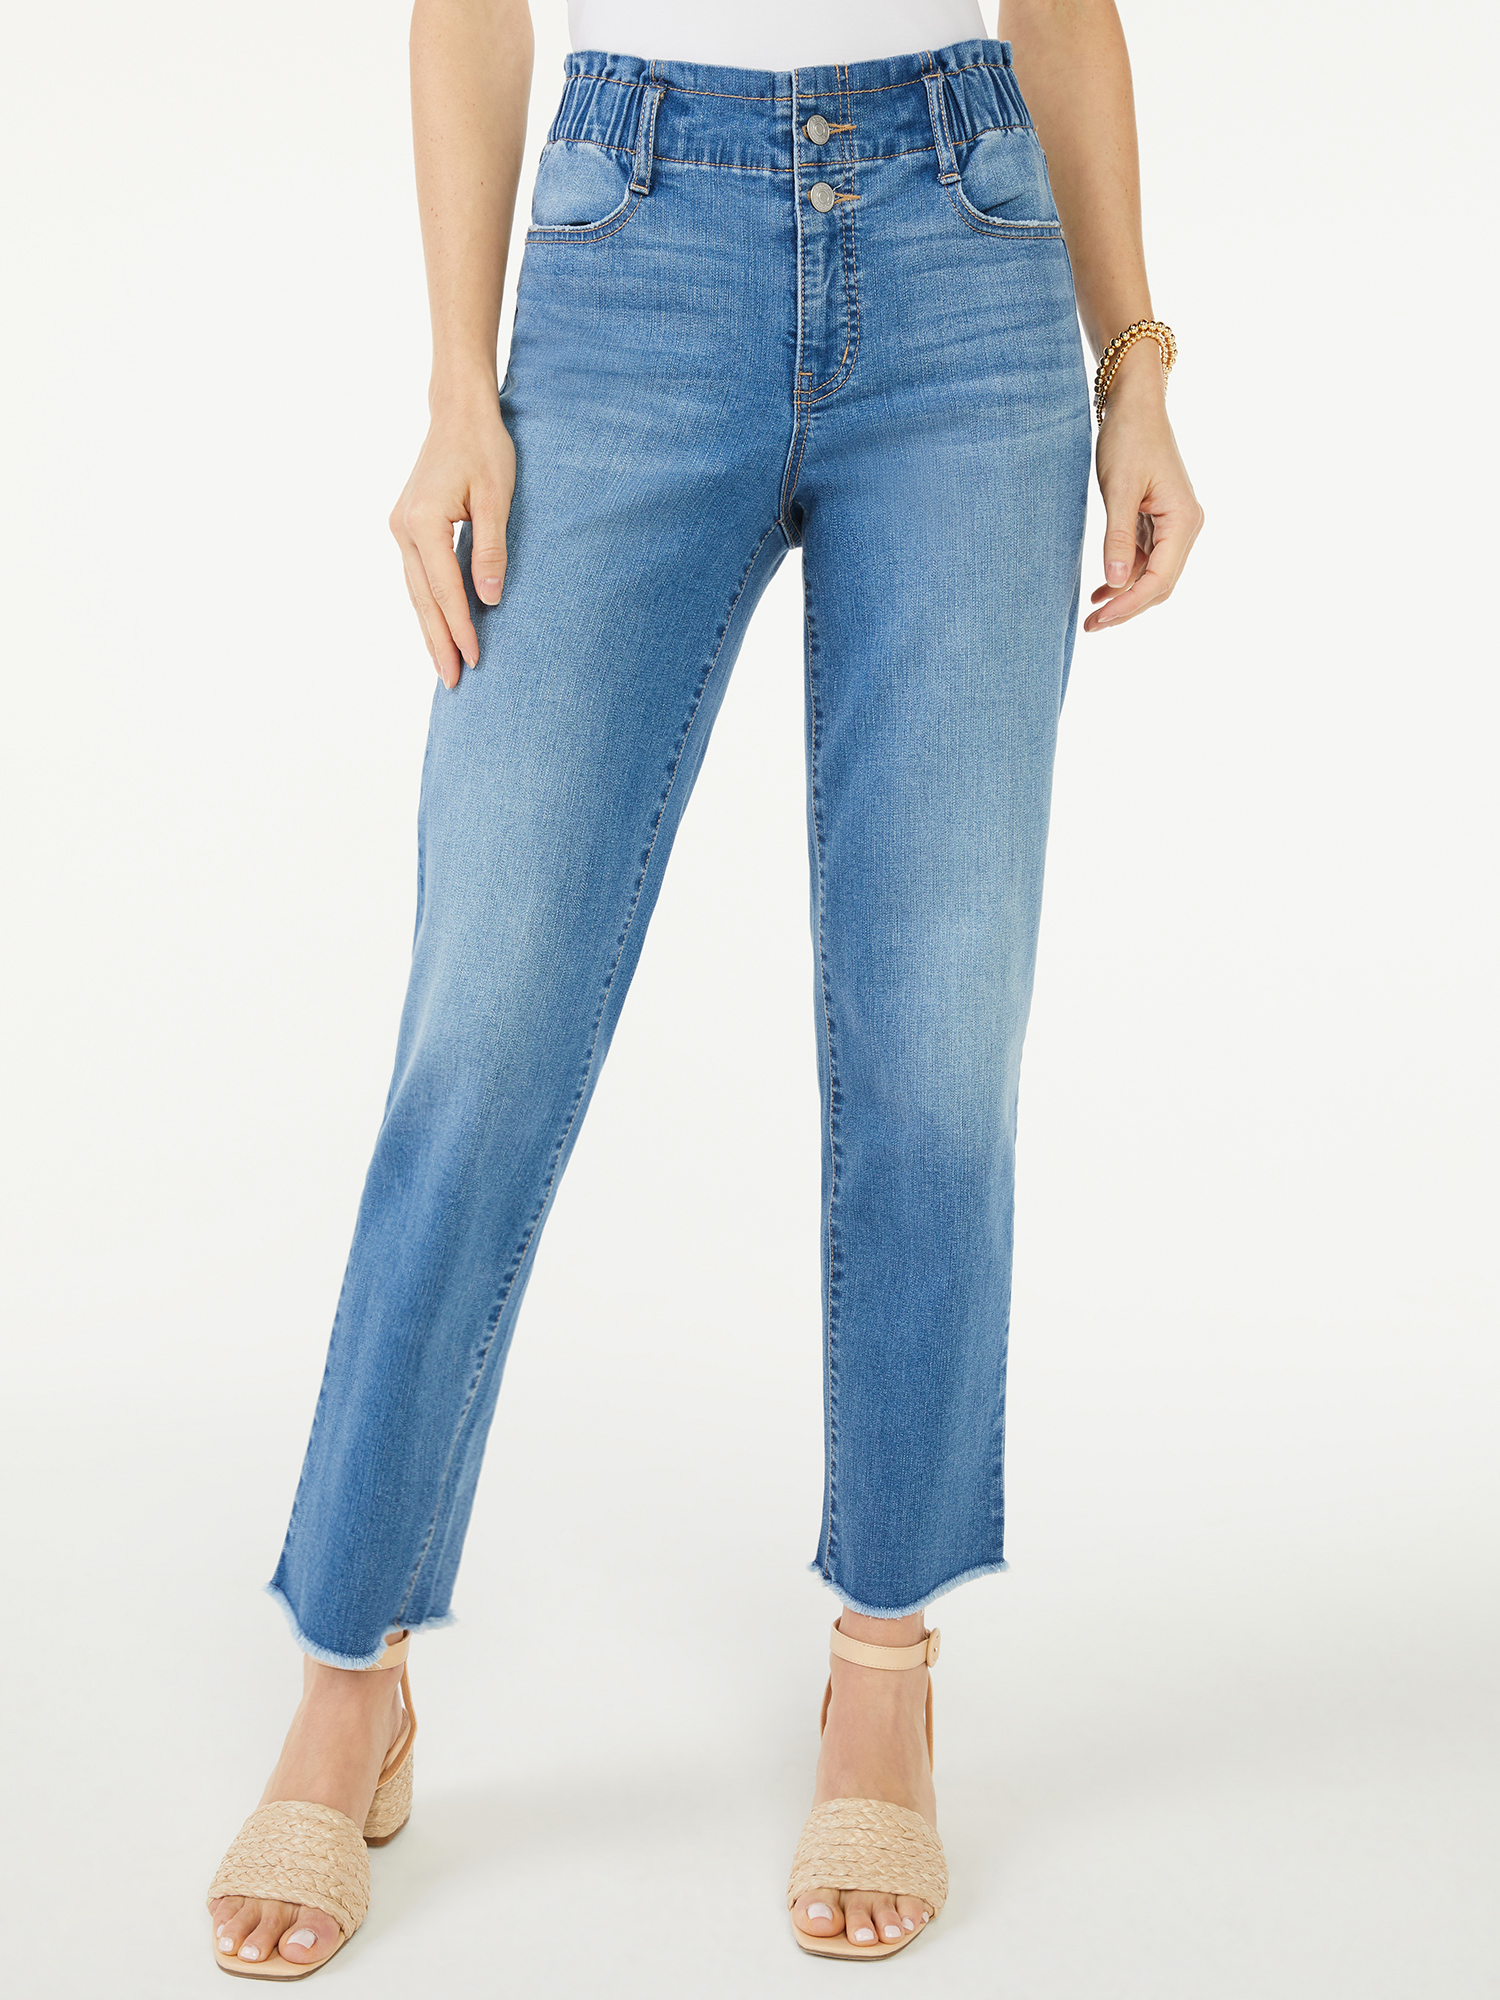 Scoop Women's High-Rise Straight Crop Jeans - image 1 of 6